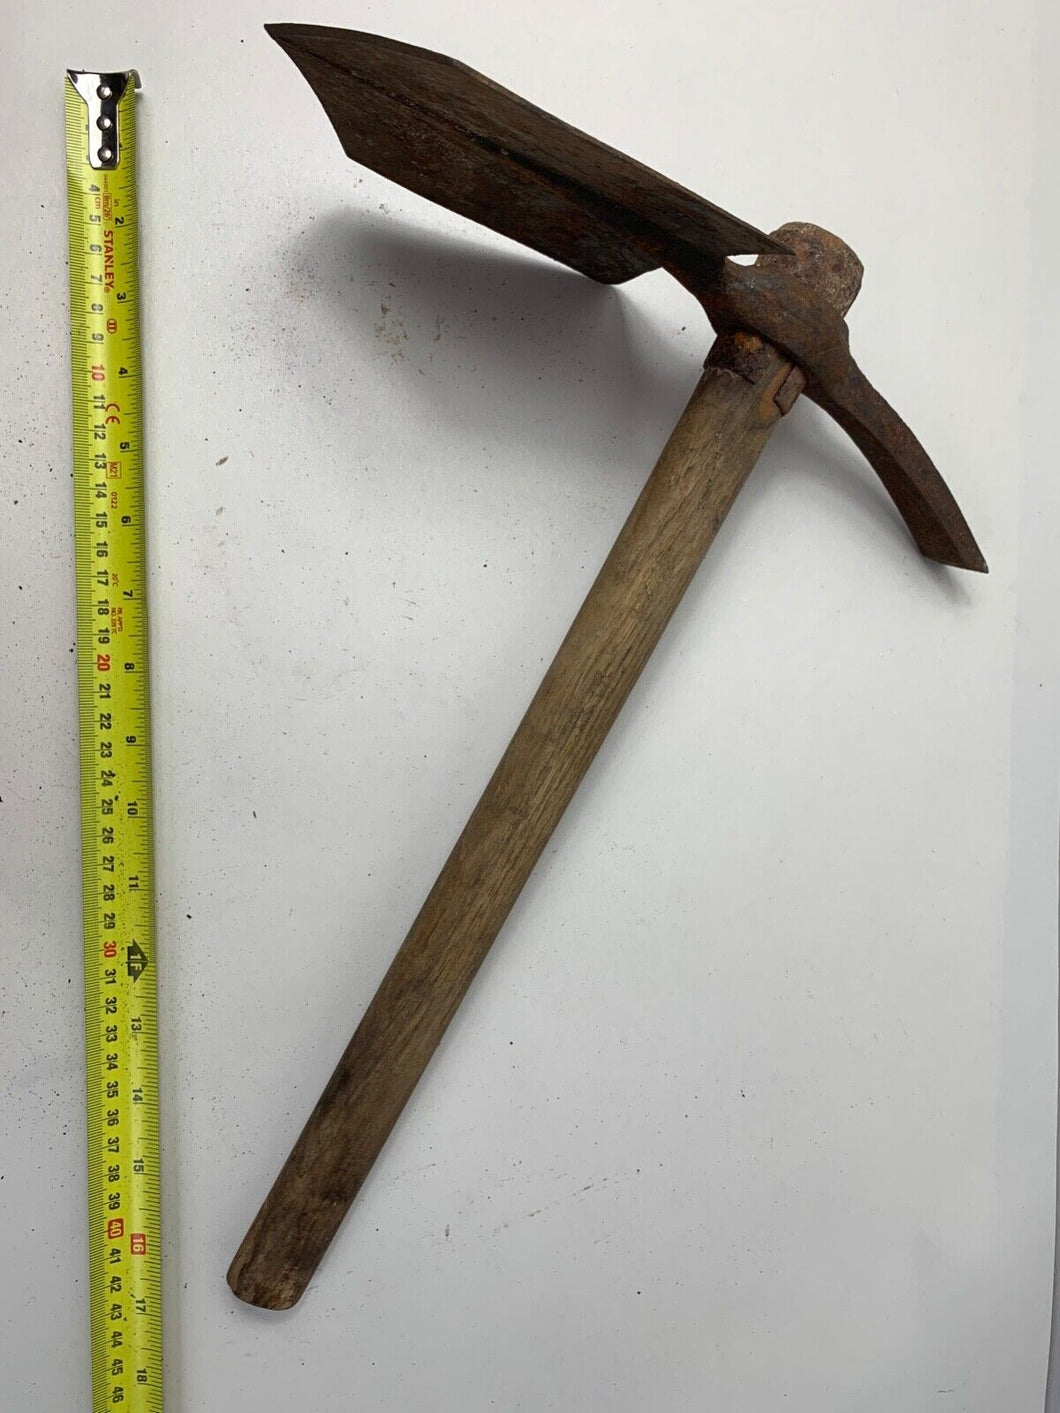 Original WW2 British Army Helve Entrenching Tool - 1944 Dated